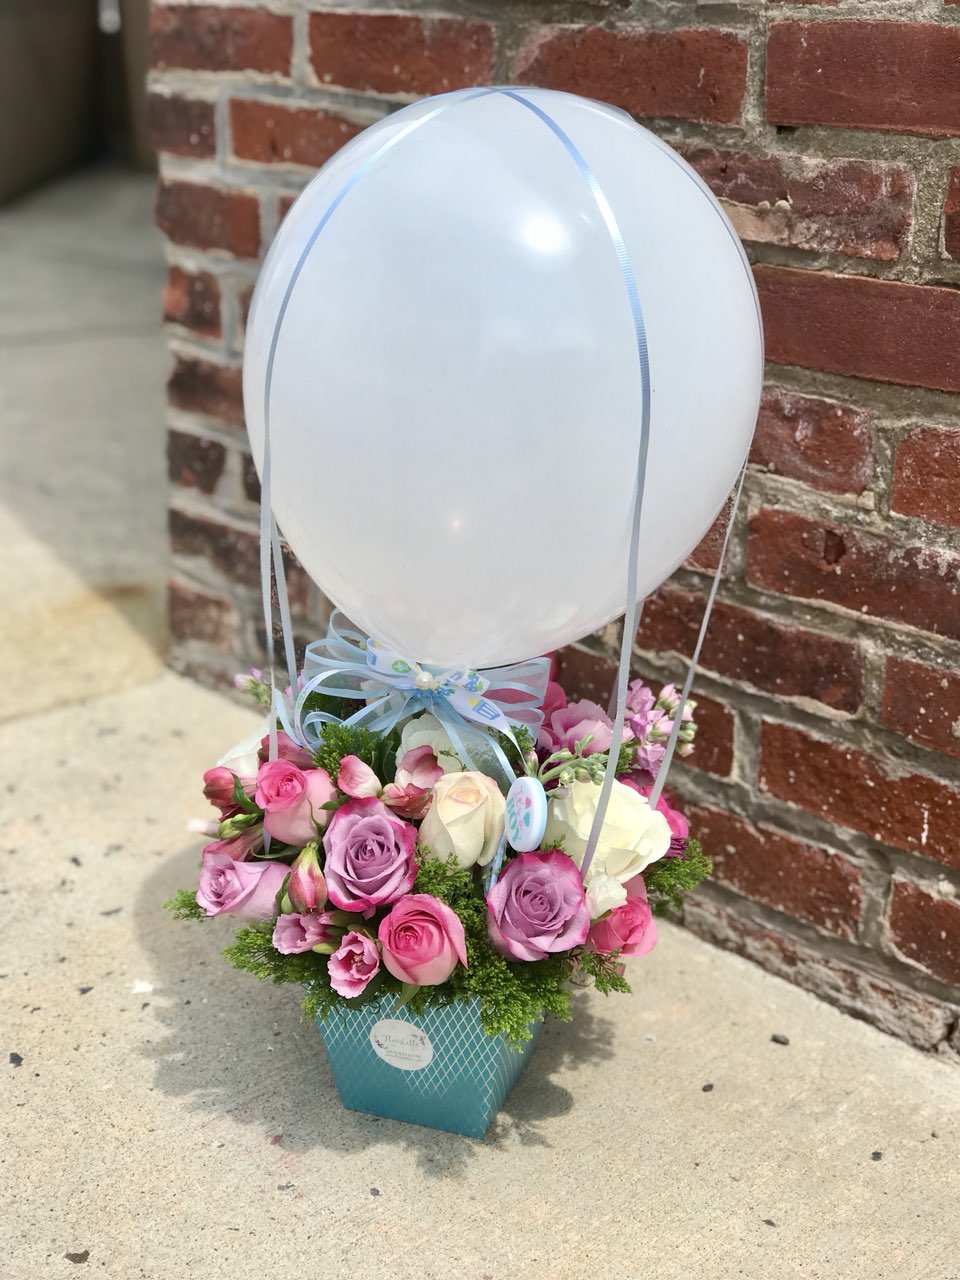 Celebrate a sweet boys's and girl`s arrival with this precious air balloon!  Includes:  Pink, white, lavender roses, pink alstroemeria, assorted greens. Box Balloon Free message card